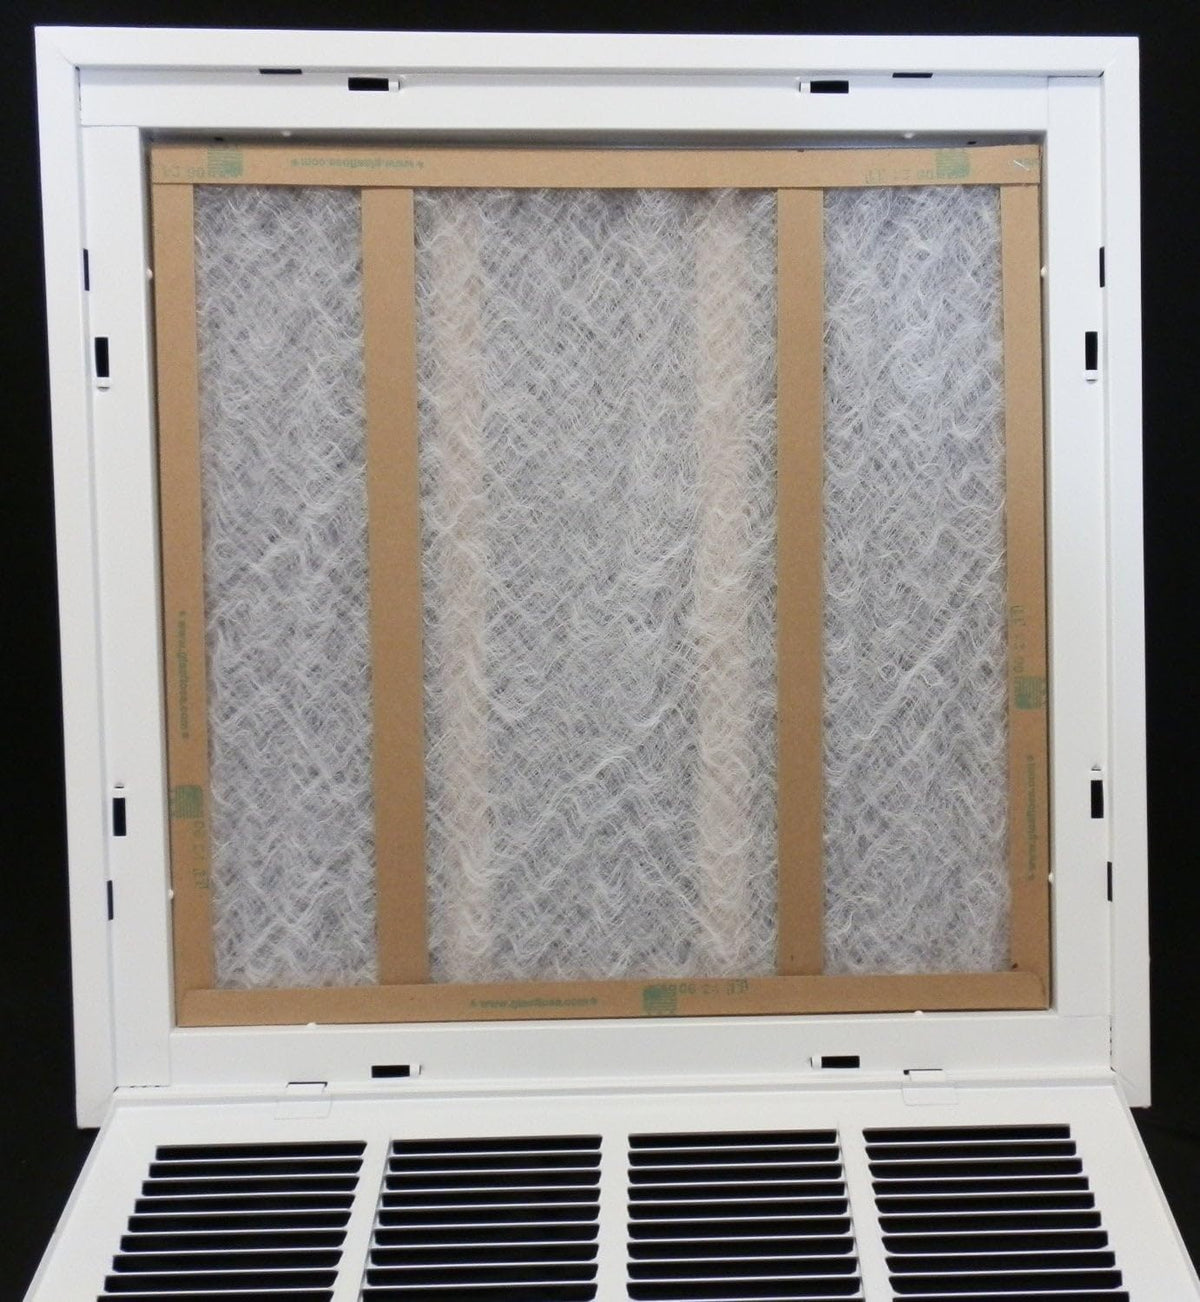 8&quot; X 32&quot; Steel Return Air Filter Grille for 1&quot; Filter - Removable Frame - [Outer Dimensions: 10 5/8&quot; X 34 5/8&quot;]